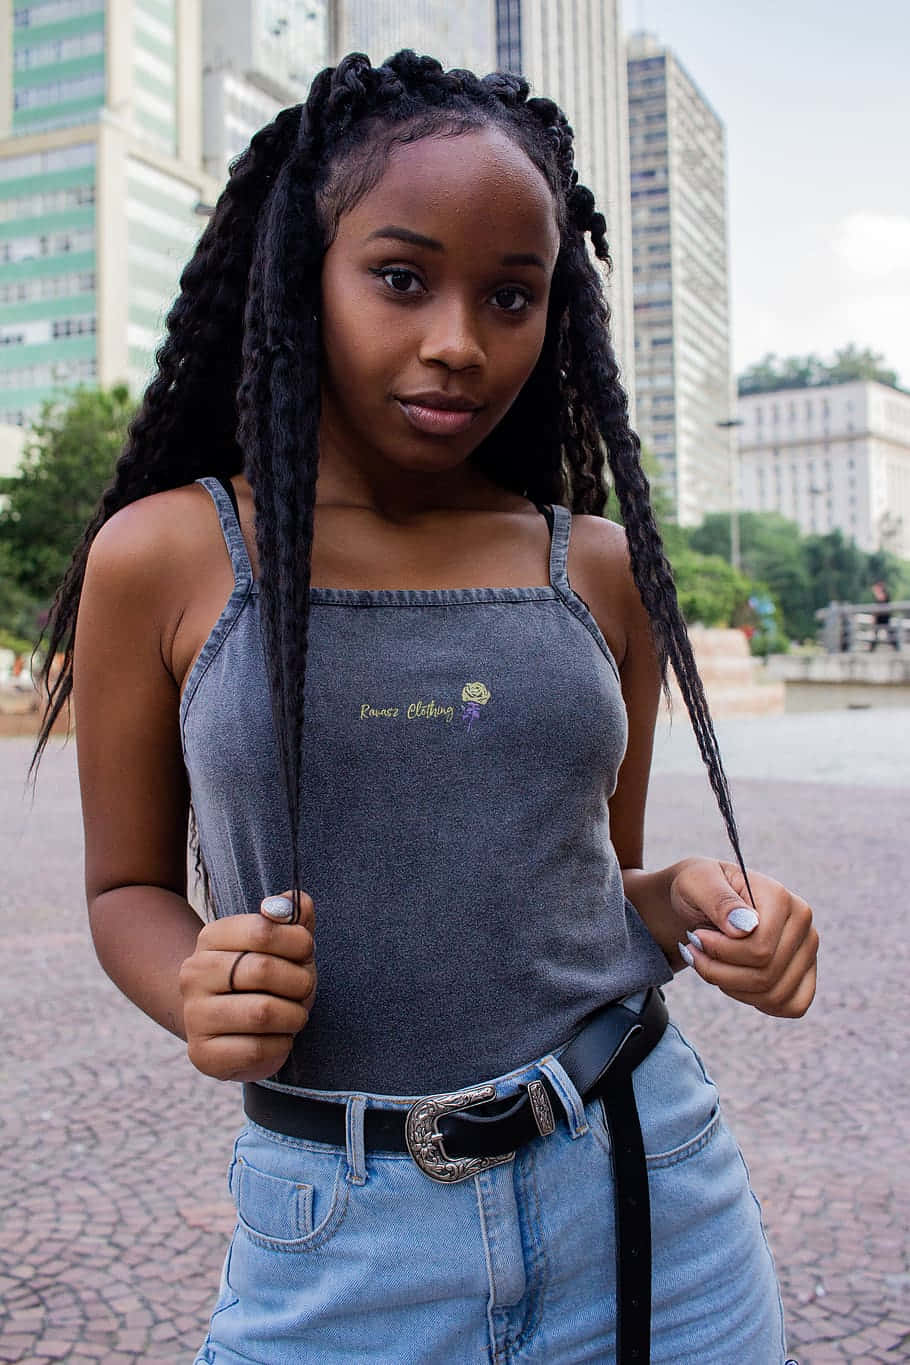 A Young Woman Wearing A Gray Tank Top And Jeans